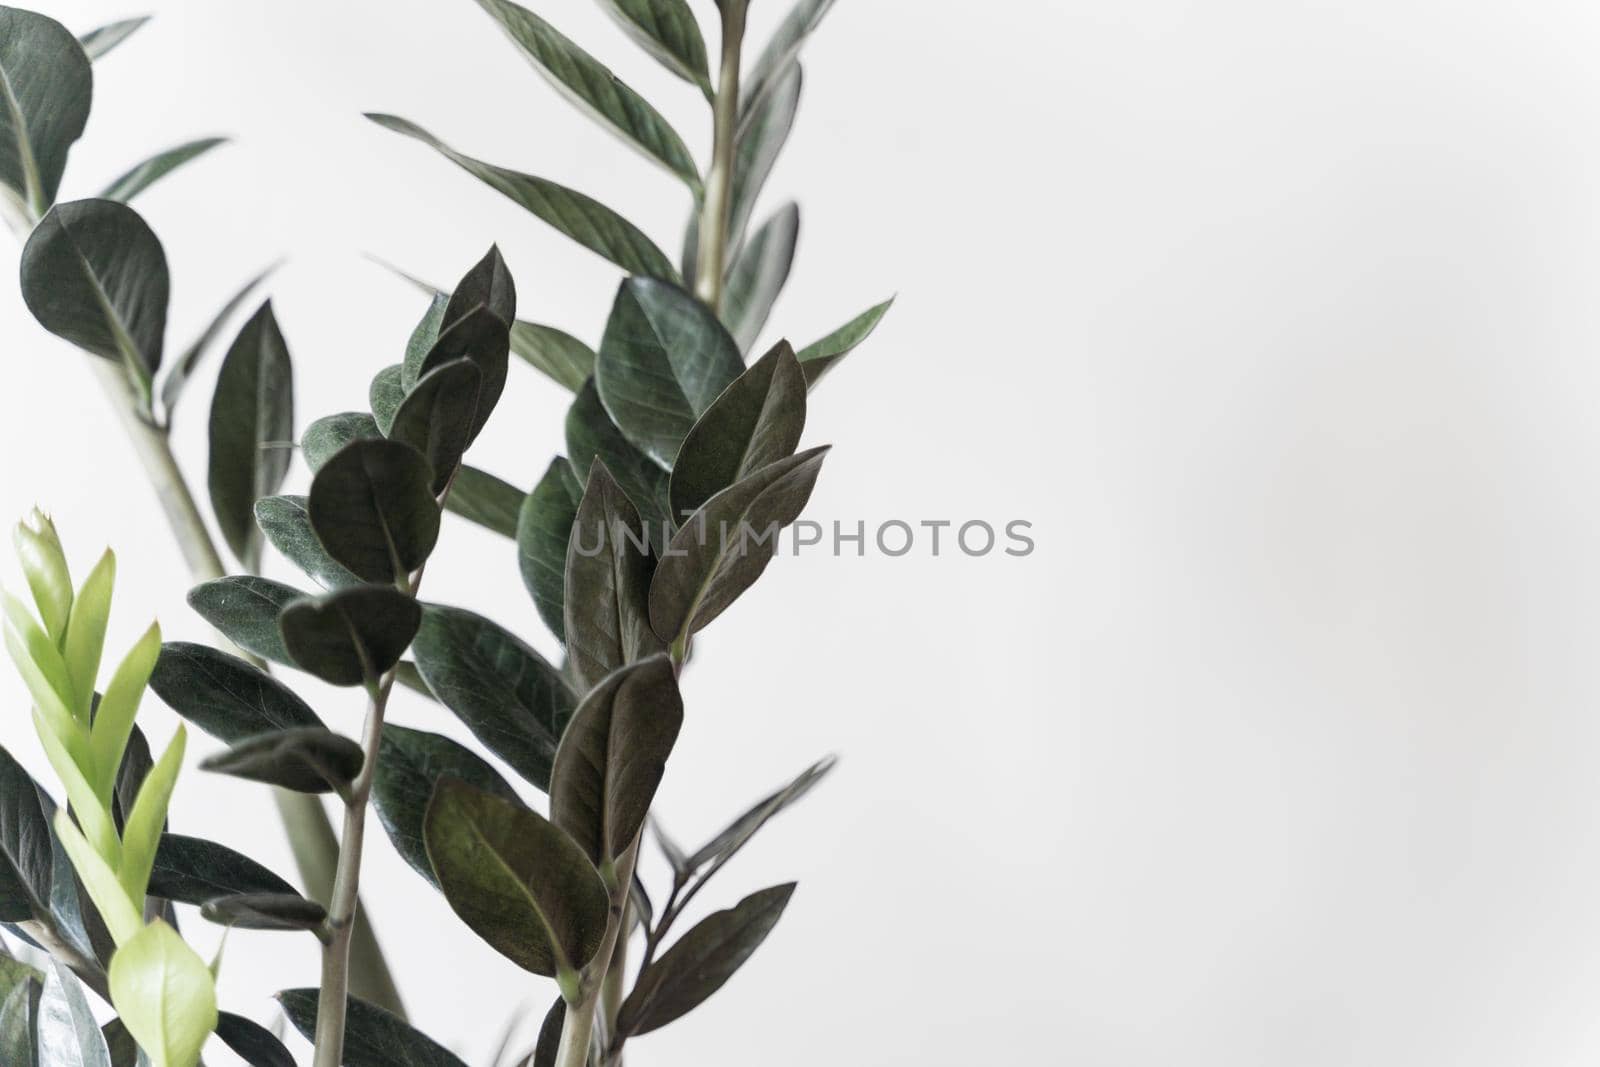 Plant Dollar tree in white pot on white background by driver-s